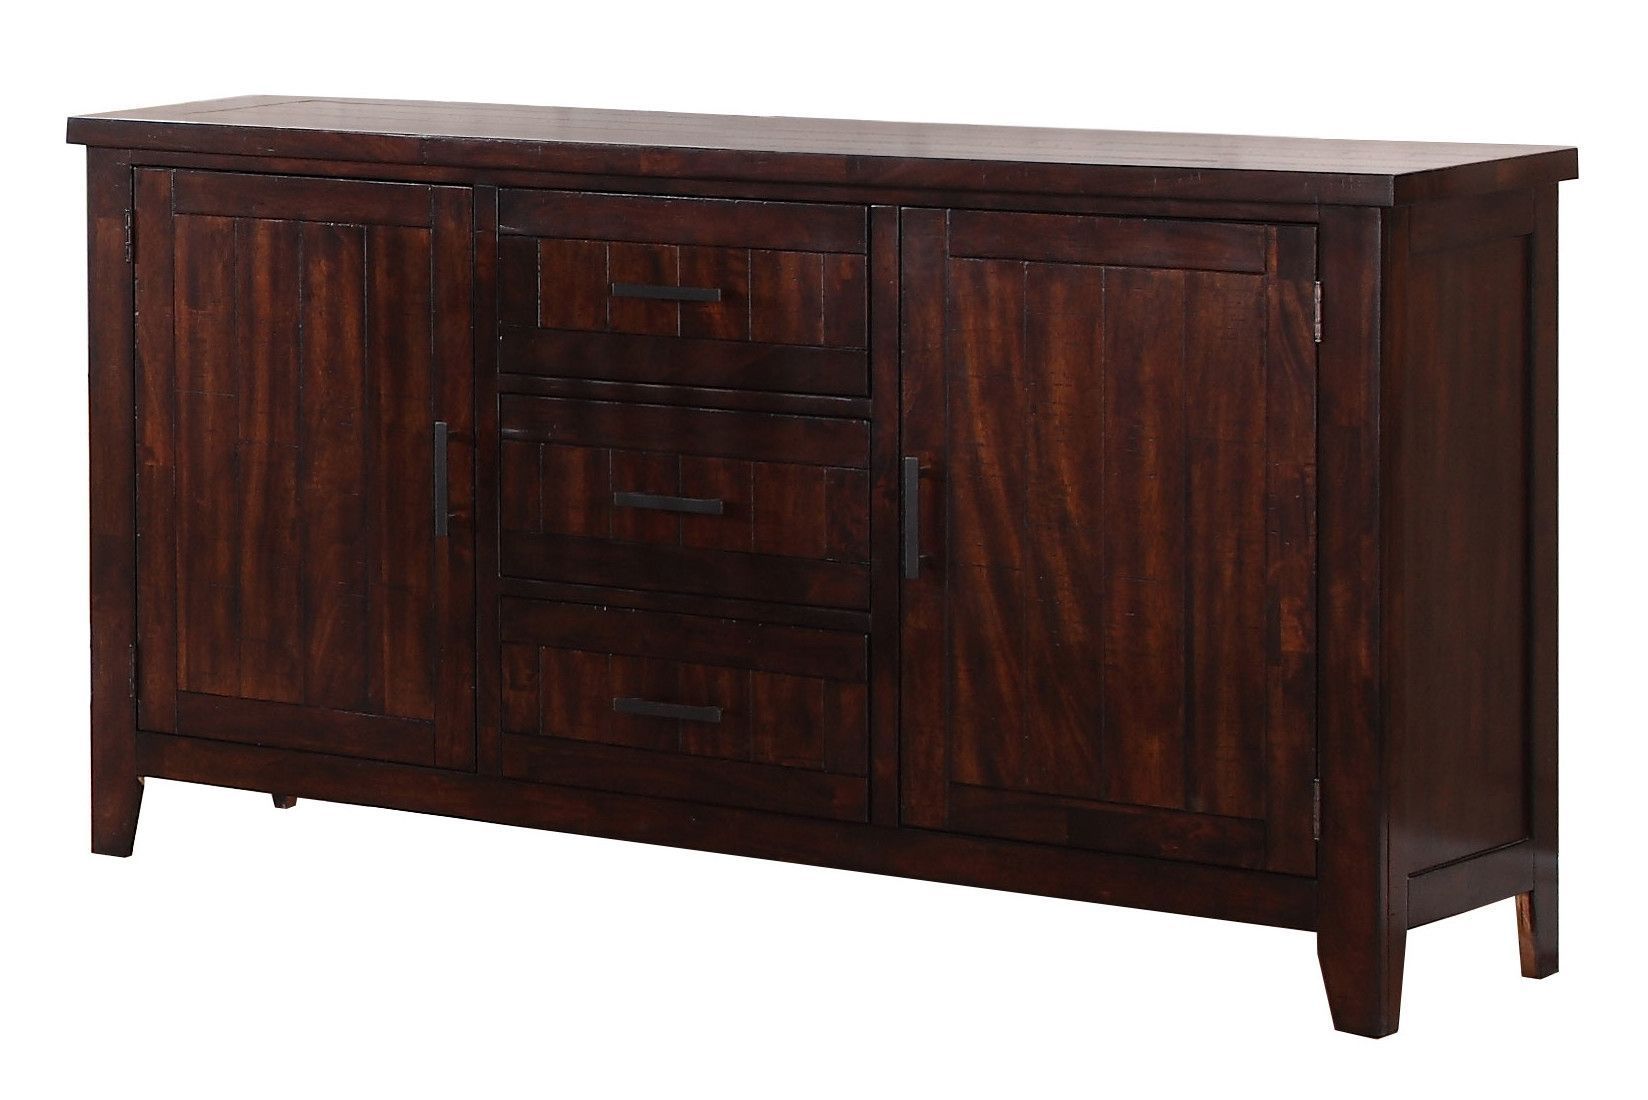 Mannox Sideboard | Products | Sideboard, Dining Room, Furniture With Regard To Seiling Sideboards (View 4 of 30)